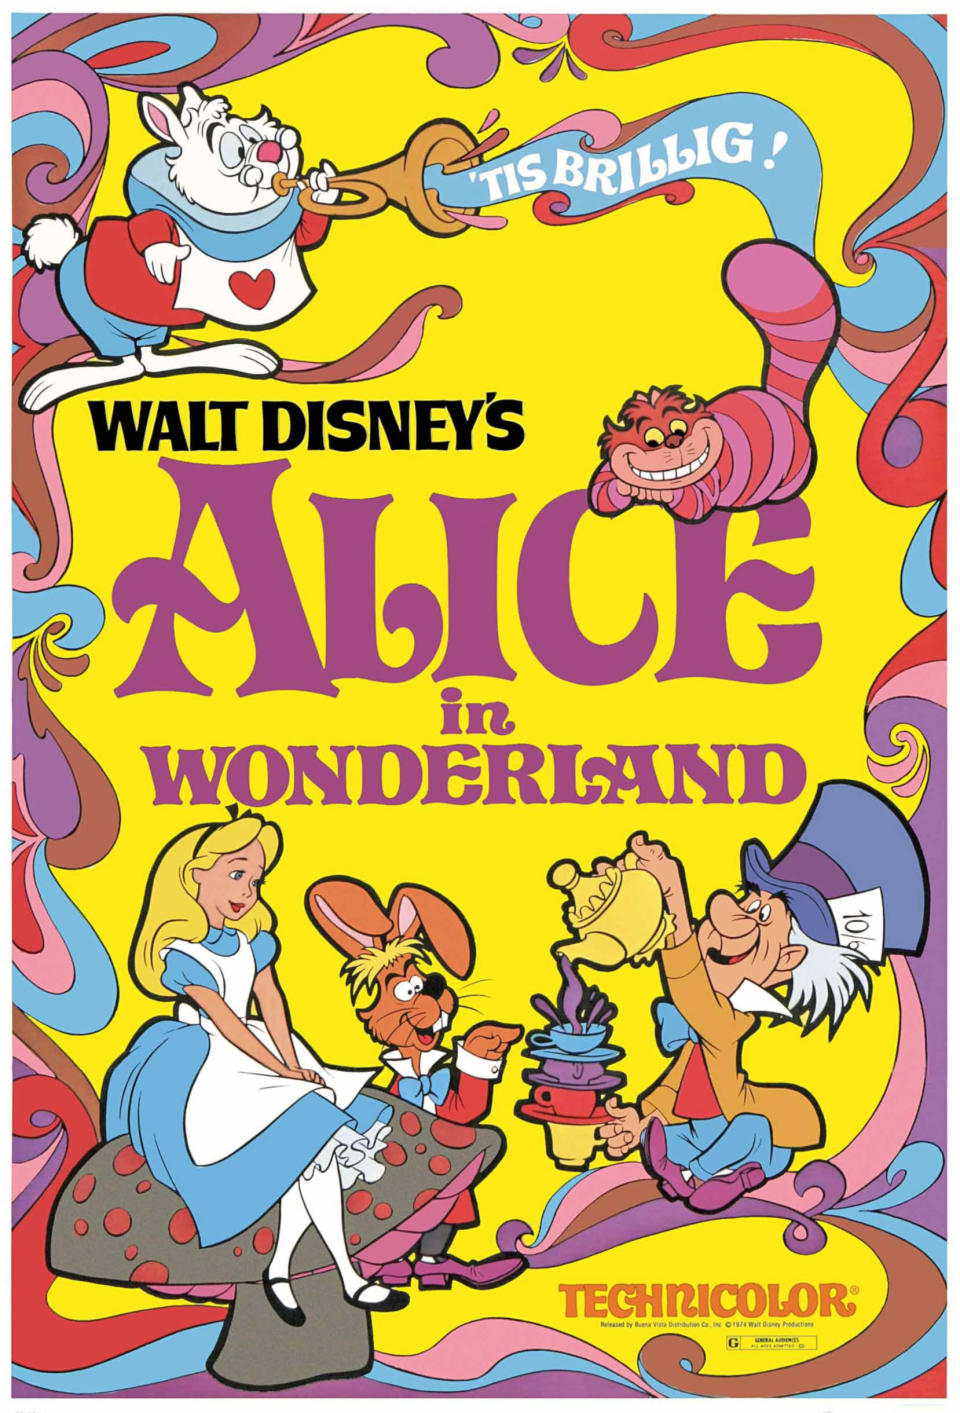 Vintage "Alice in Wonderland" movie poster featuring animated characters Alice, White Rabbit, Cheshire Cat, Mad Hatter, and March Hare